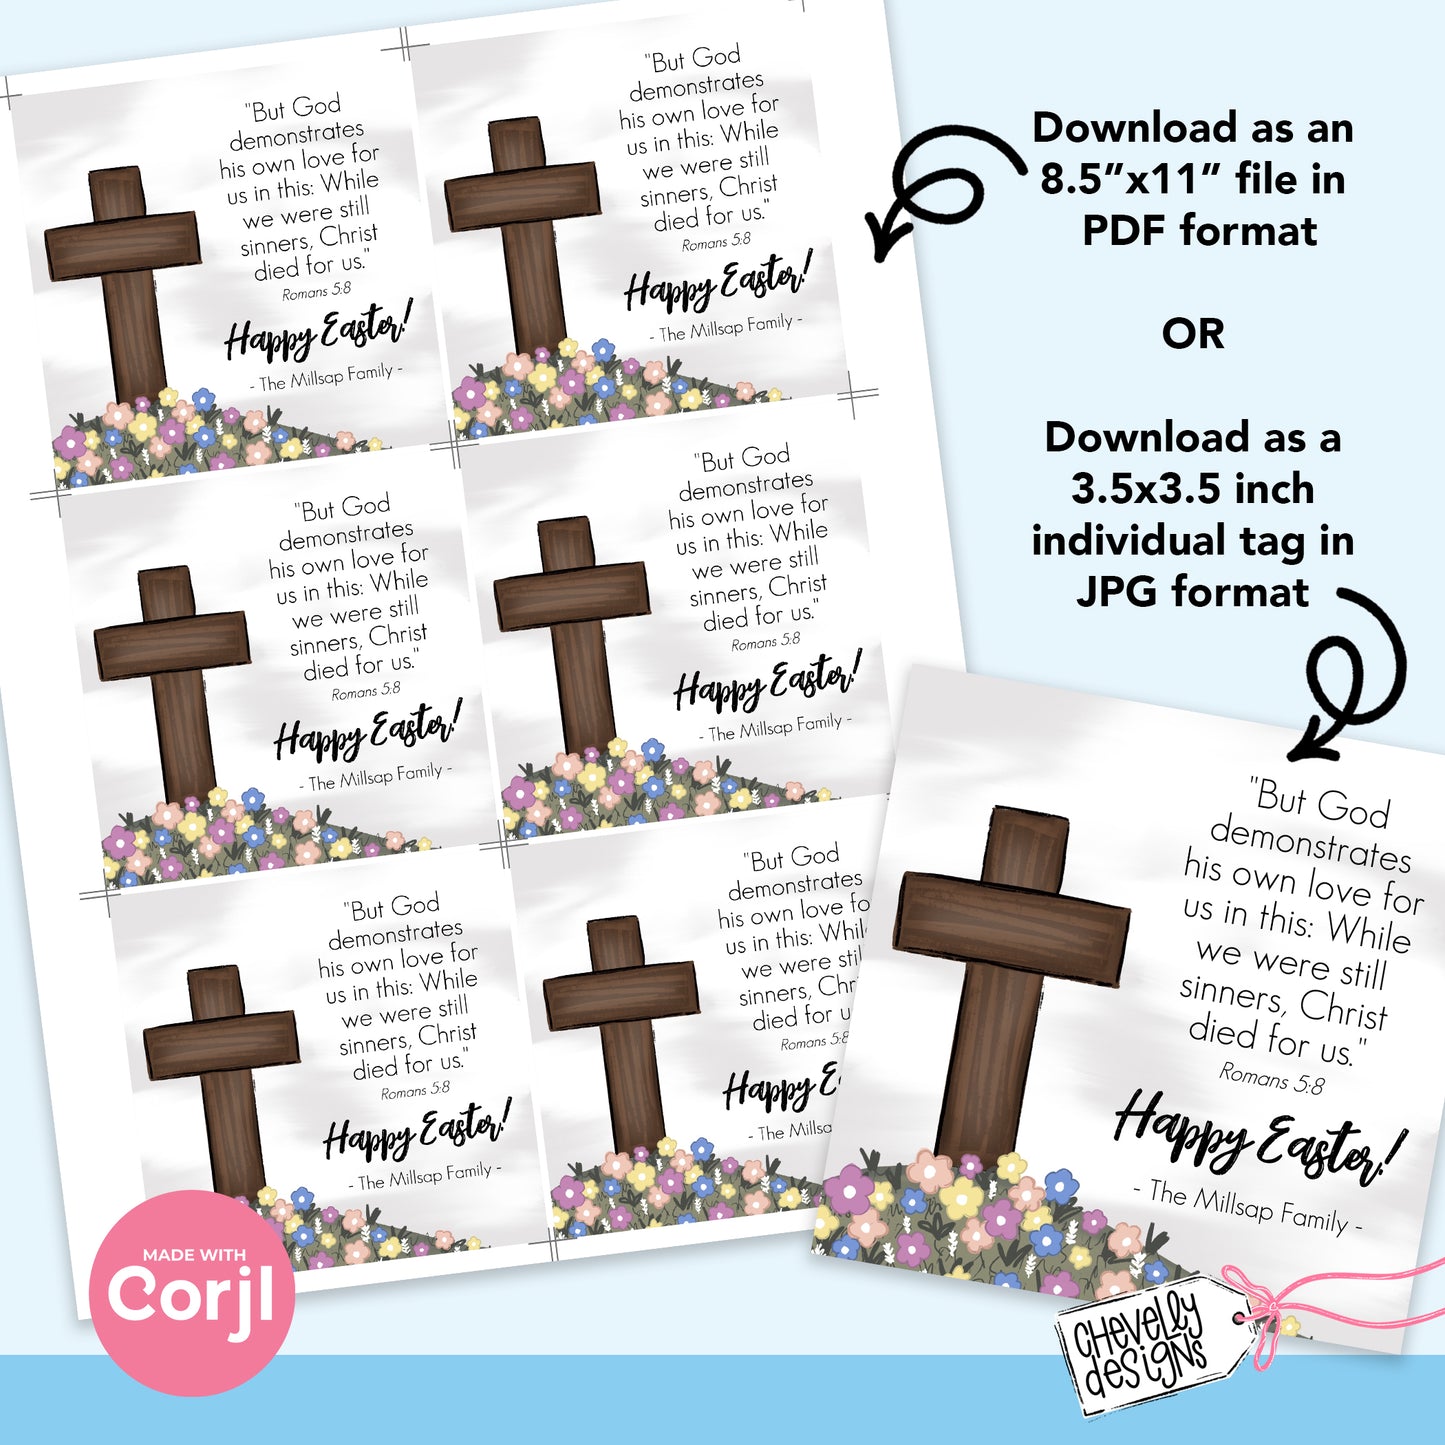 EDITABLE - While we were still sinners Christ died for us - Romans 5:8 - Easter Treat Gift Tag - Printable Digital File